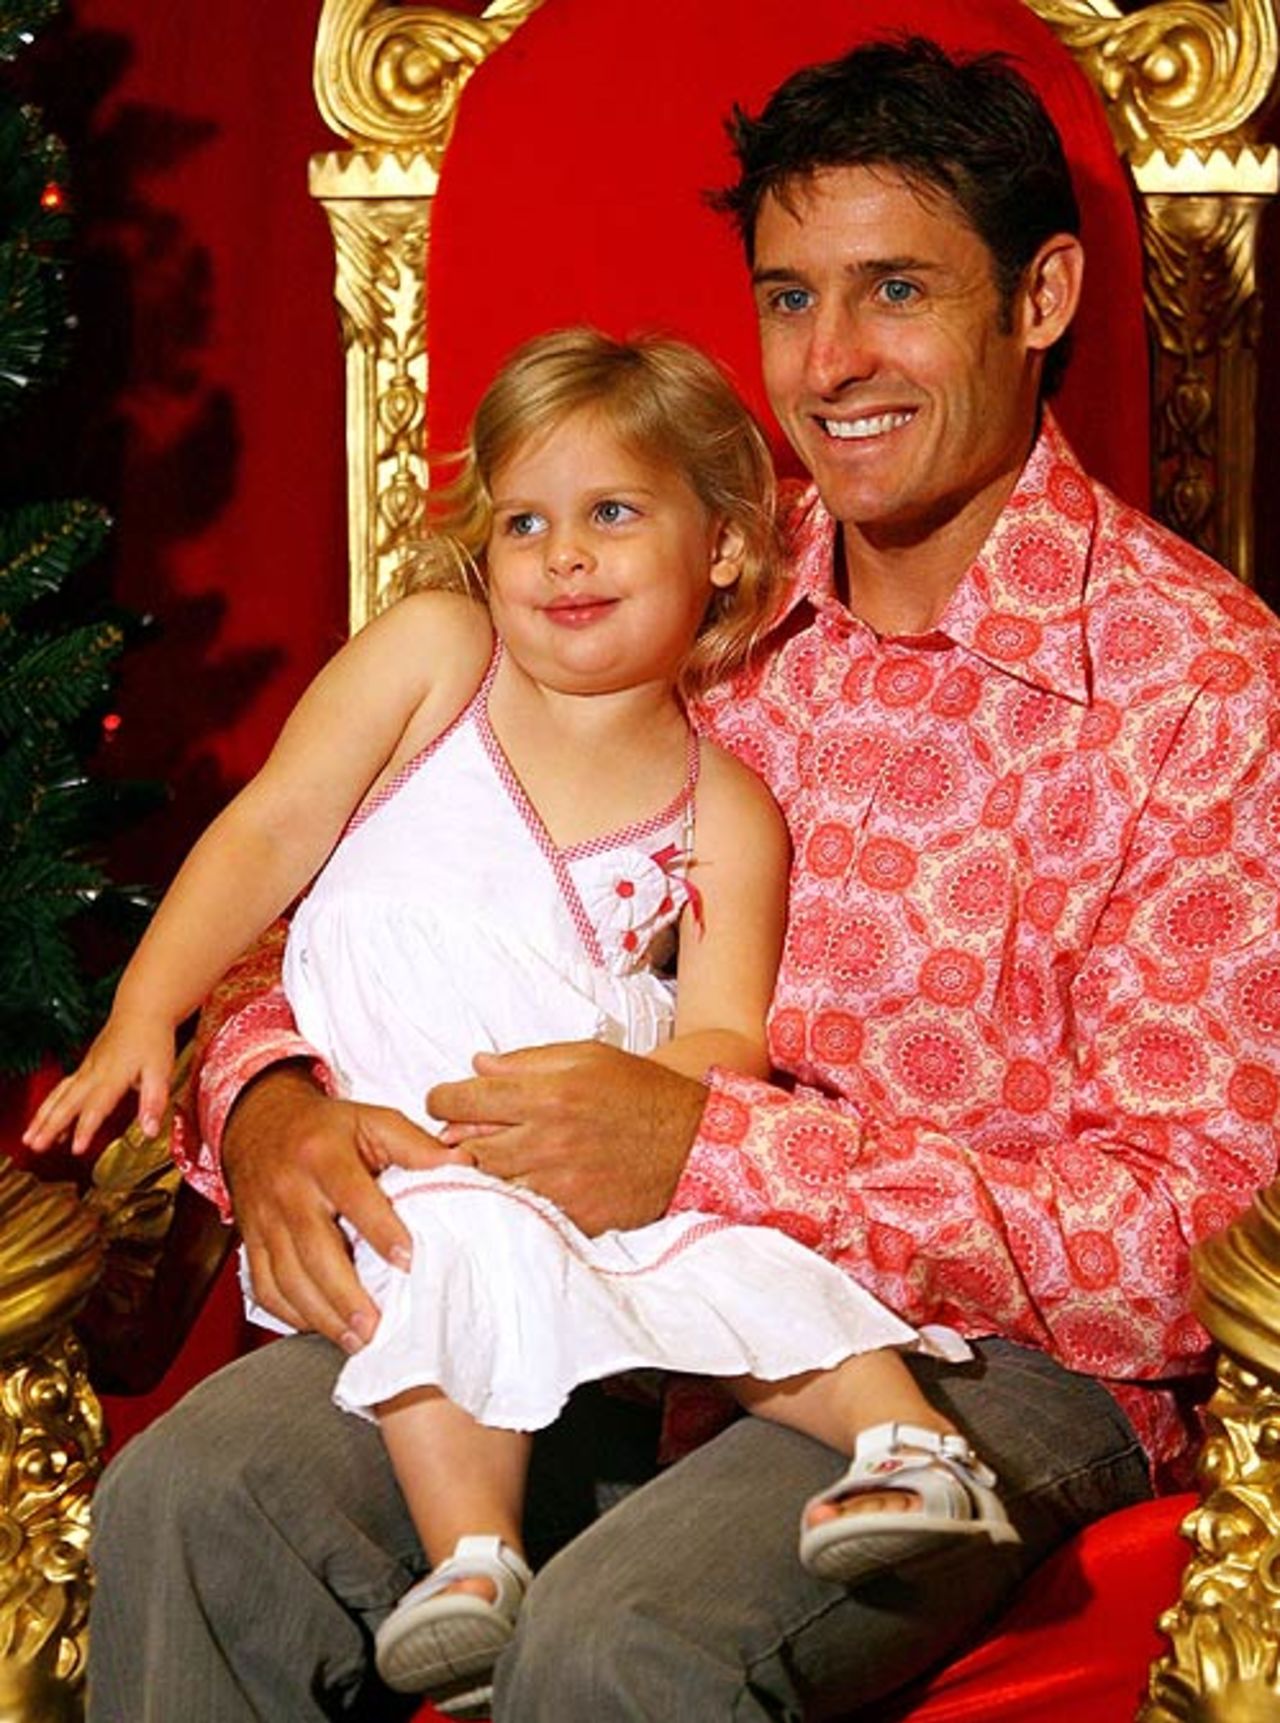 Michael Hussey poses with daughter Jasmine, Melbourne, December 25, 2006